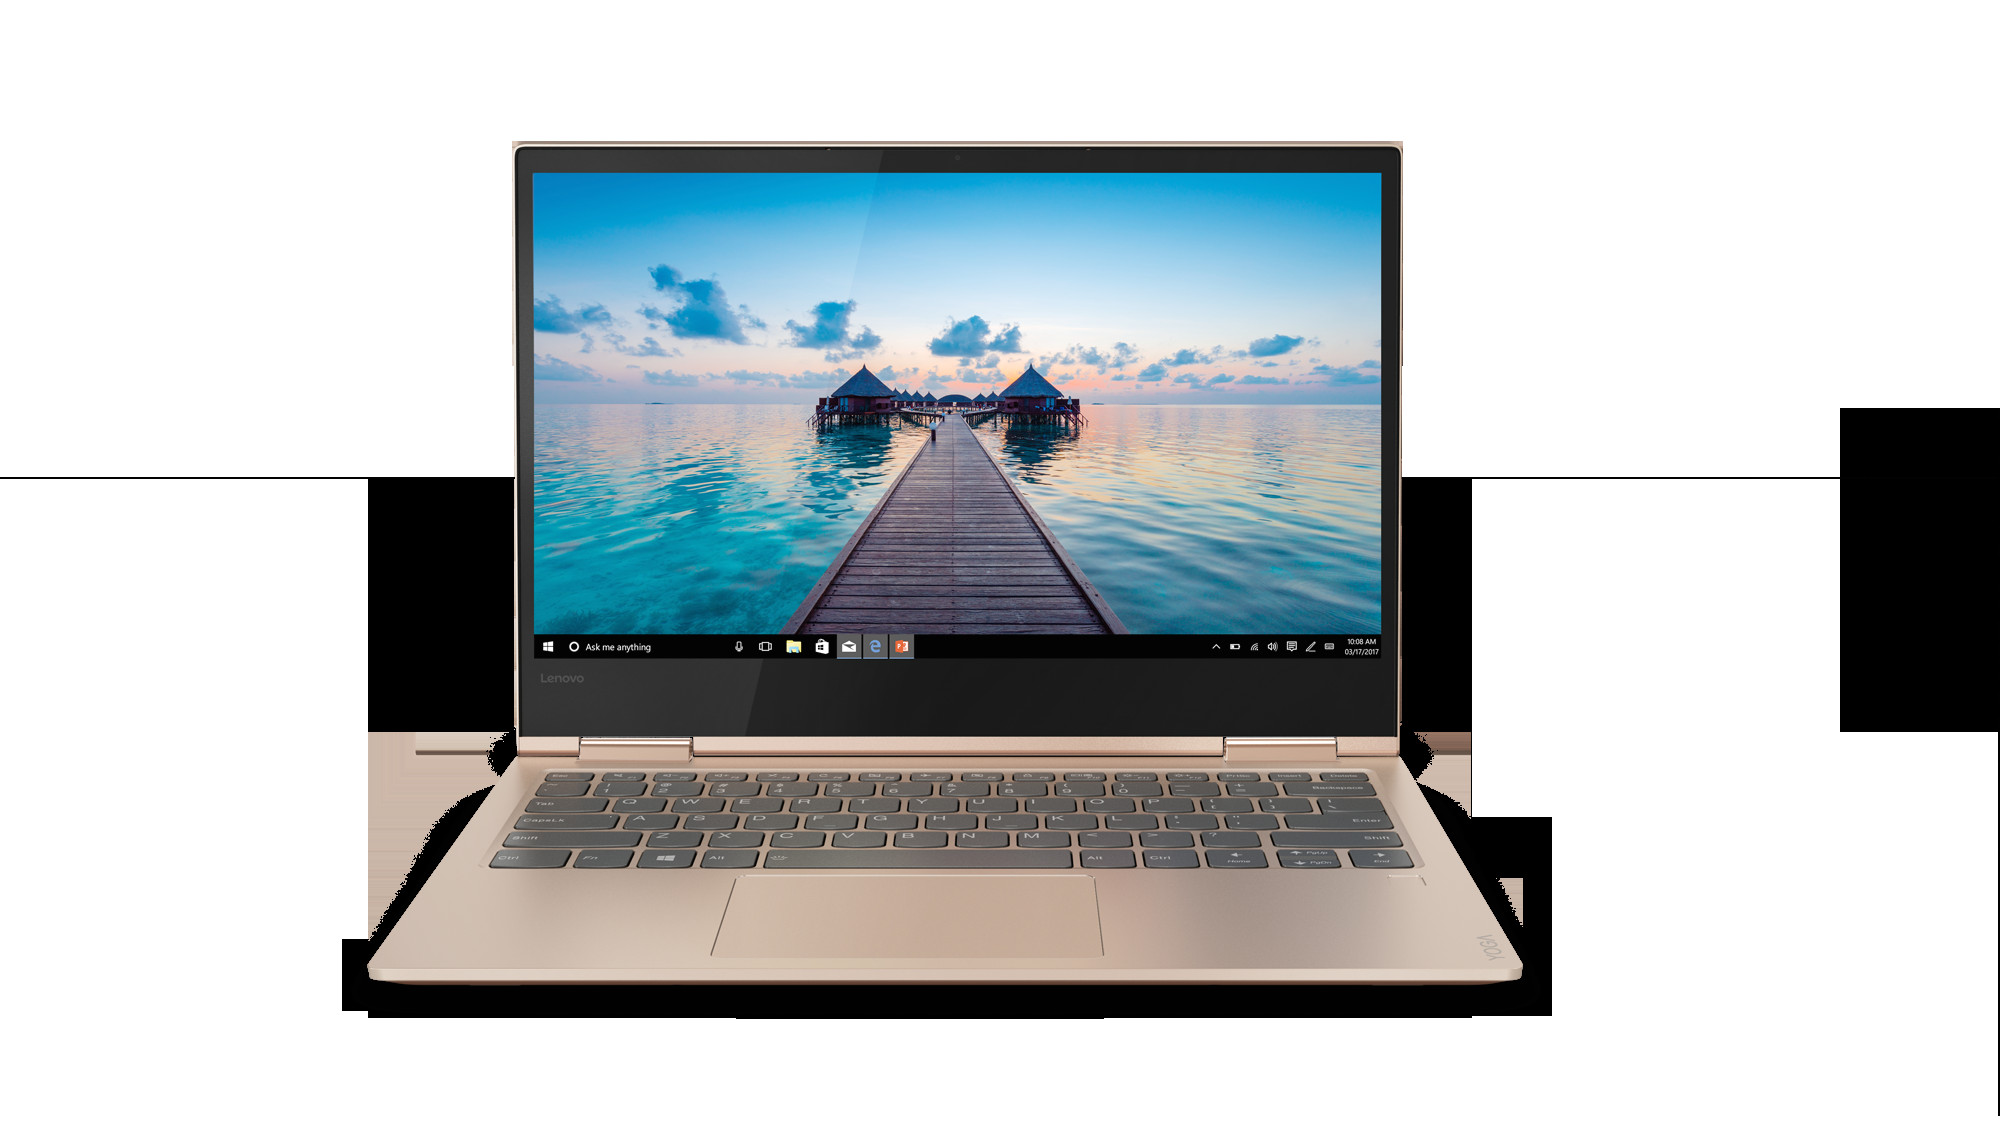 at mwc this year we re introducing the new yoga 730 in 13 inch and 15 inch models and the new 14 inch yoga 530 the latest additions to our 2 in 1